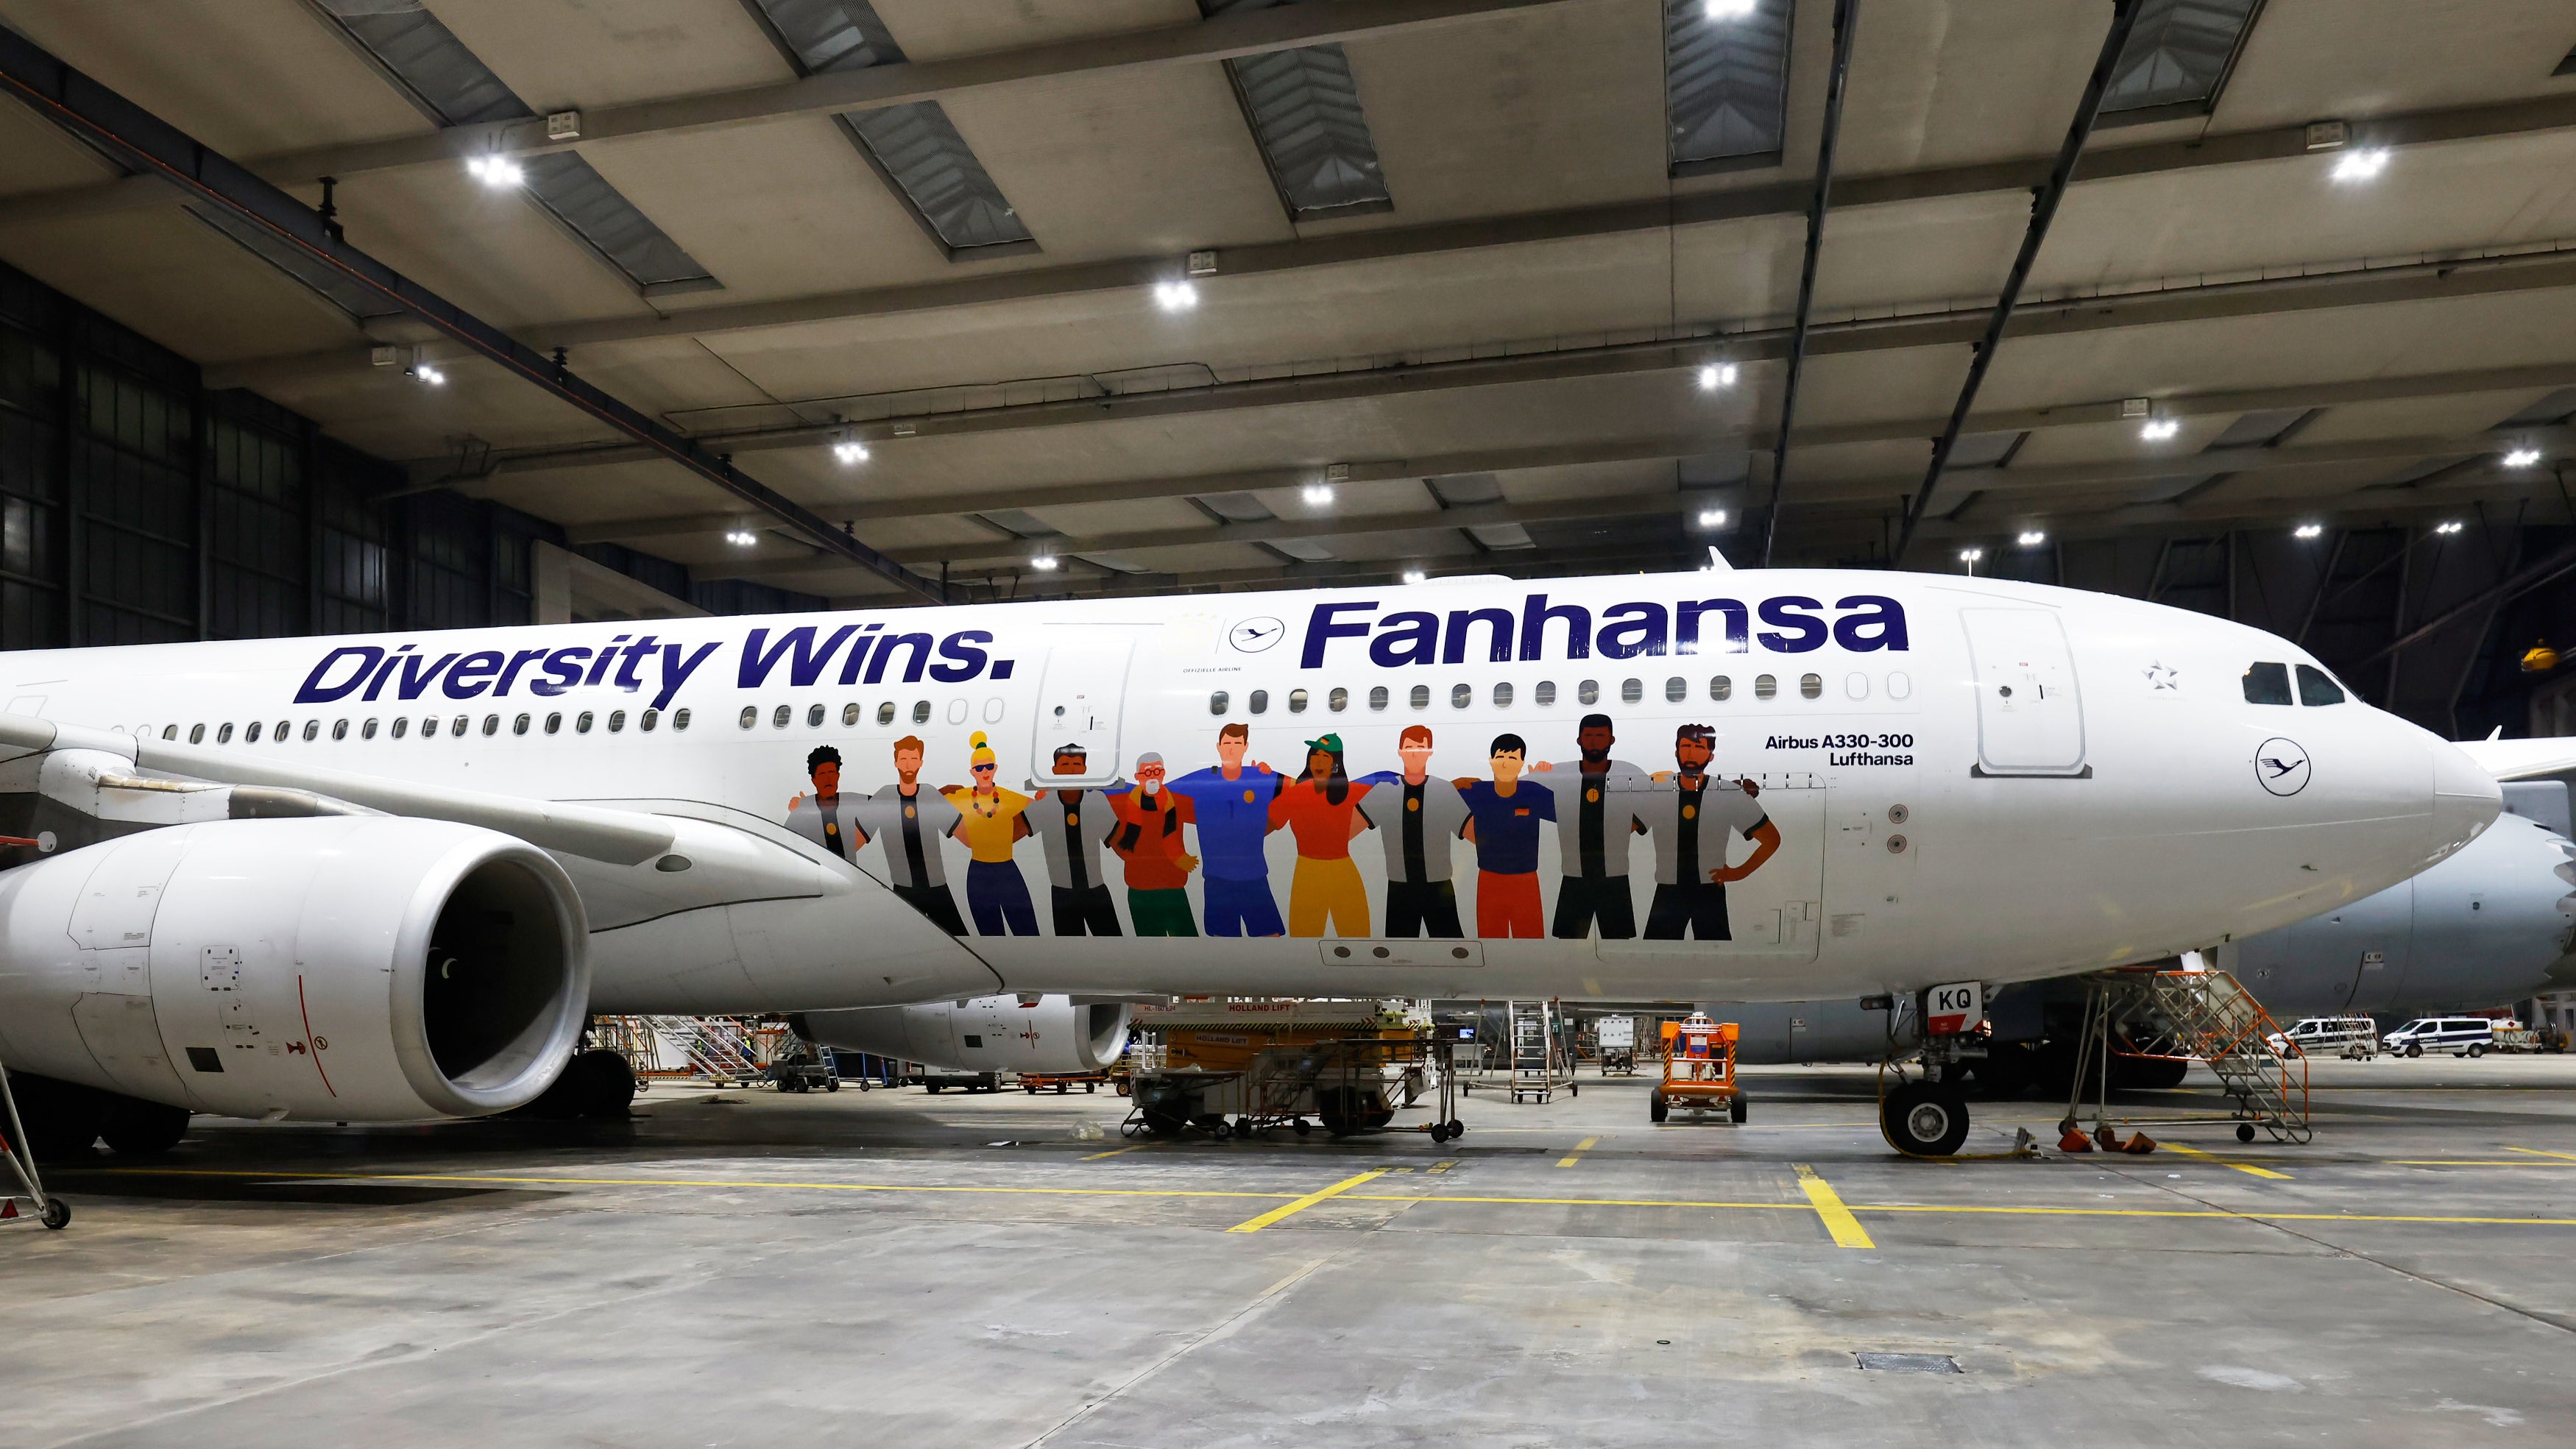 The World Cup plane’s bold livery